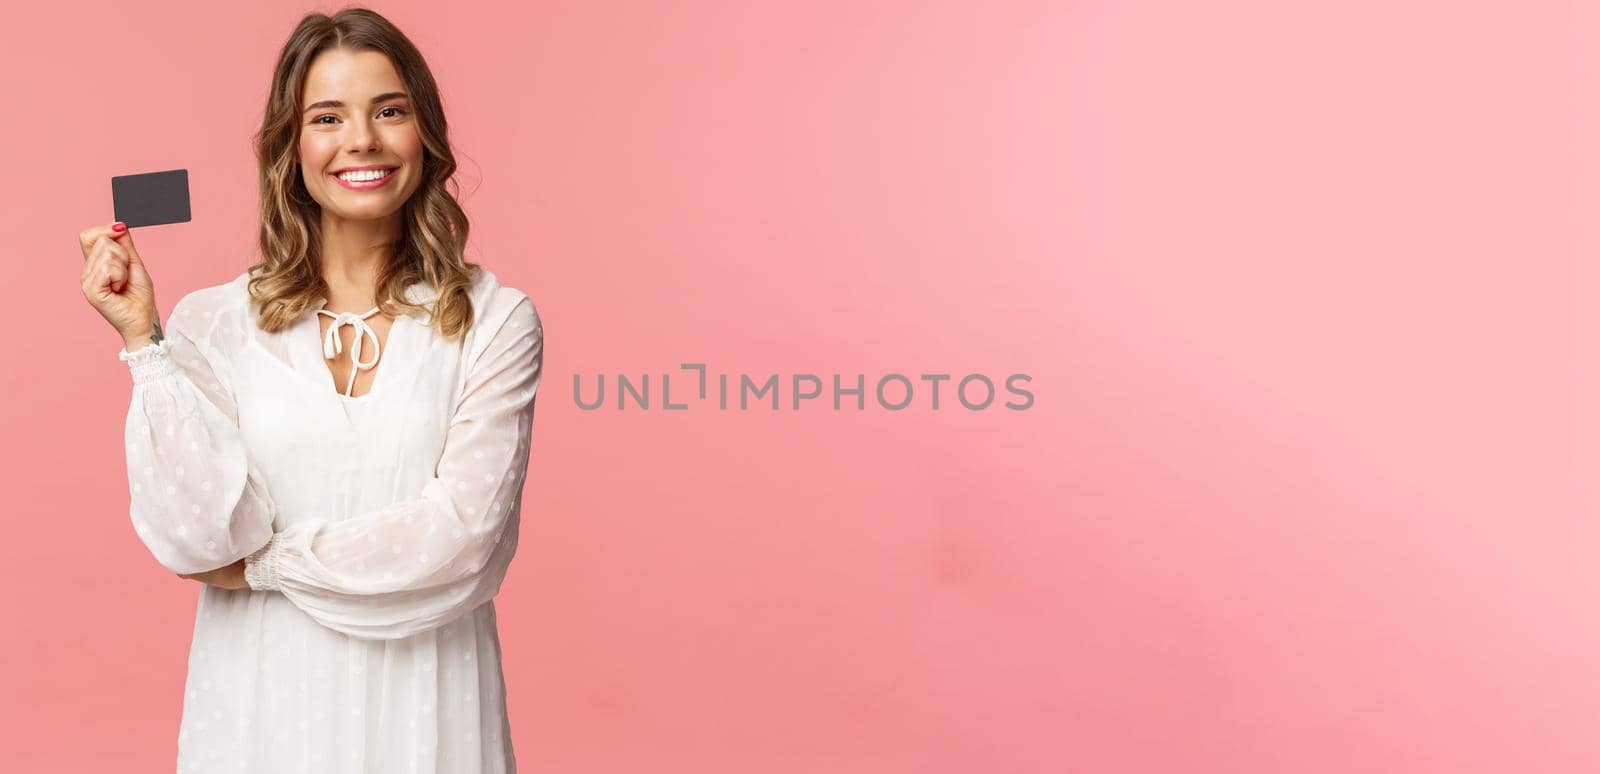 Portrait of pleased good-looking blond european female in white dress, show credit card with satisfied expression, smiling camera, recommend bank services, use payment online, pink background.